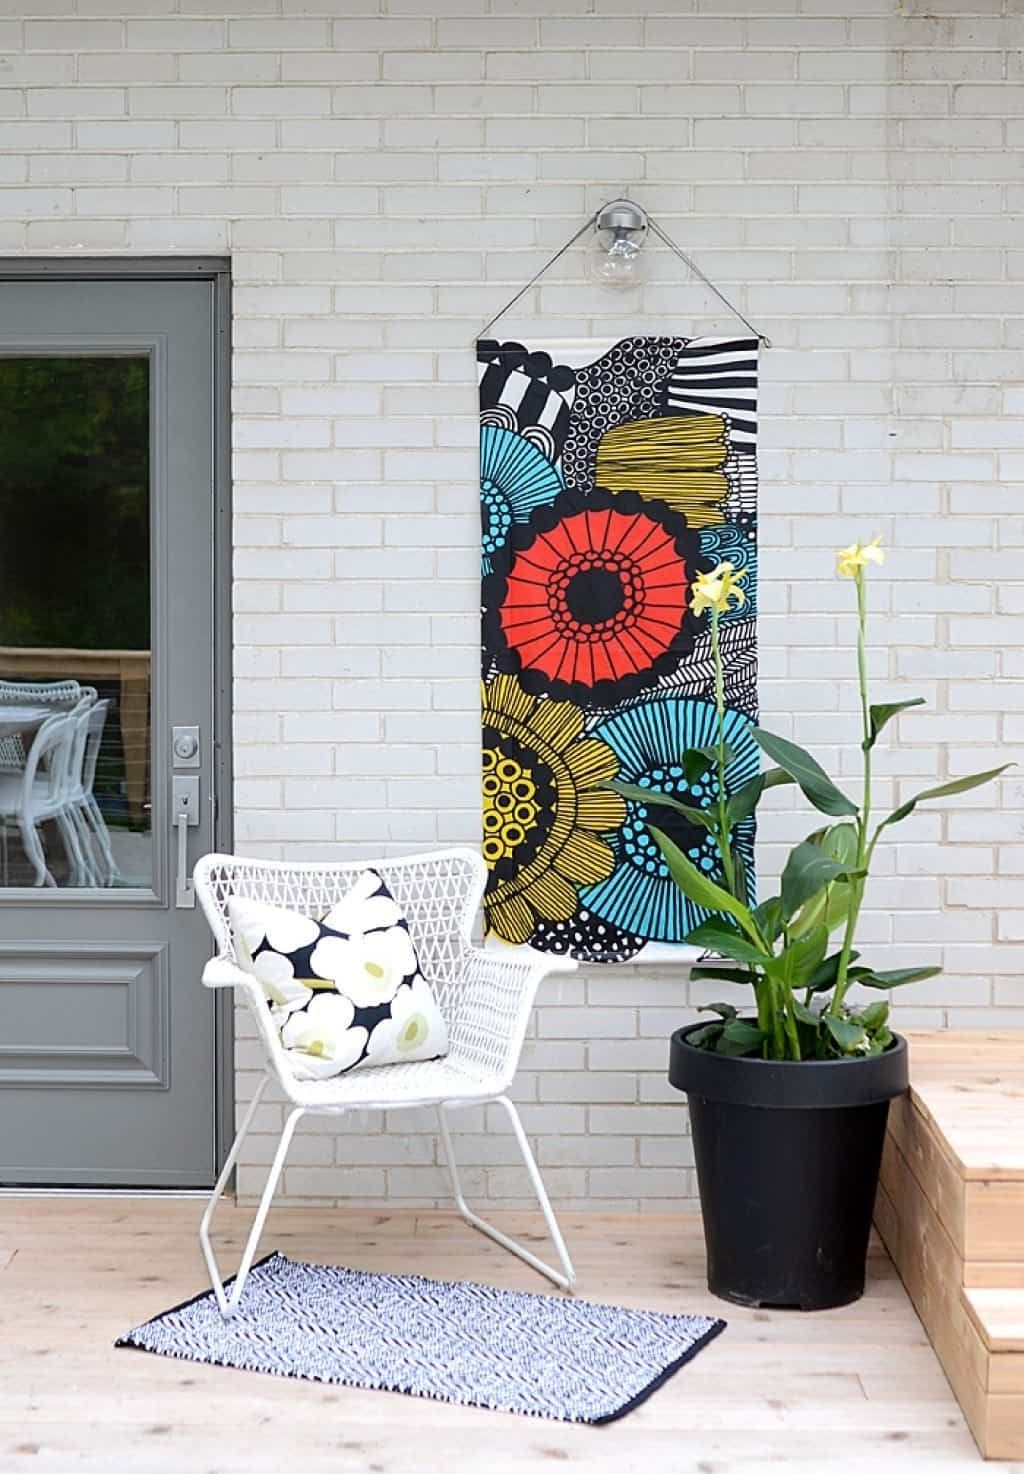 Most Current Outdoor Fabric Wall Art Pertaining To Hanging Fabric Abstract Wall Art – Decorative Outdoor Wall Art For (View 15 of 15)